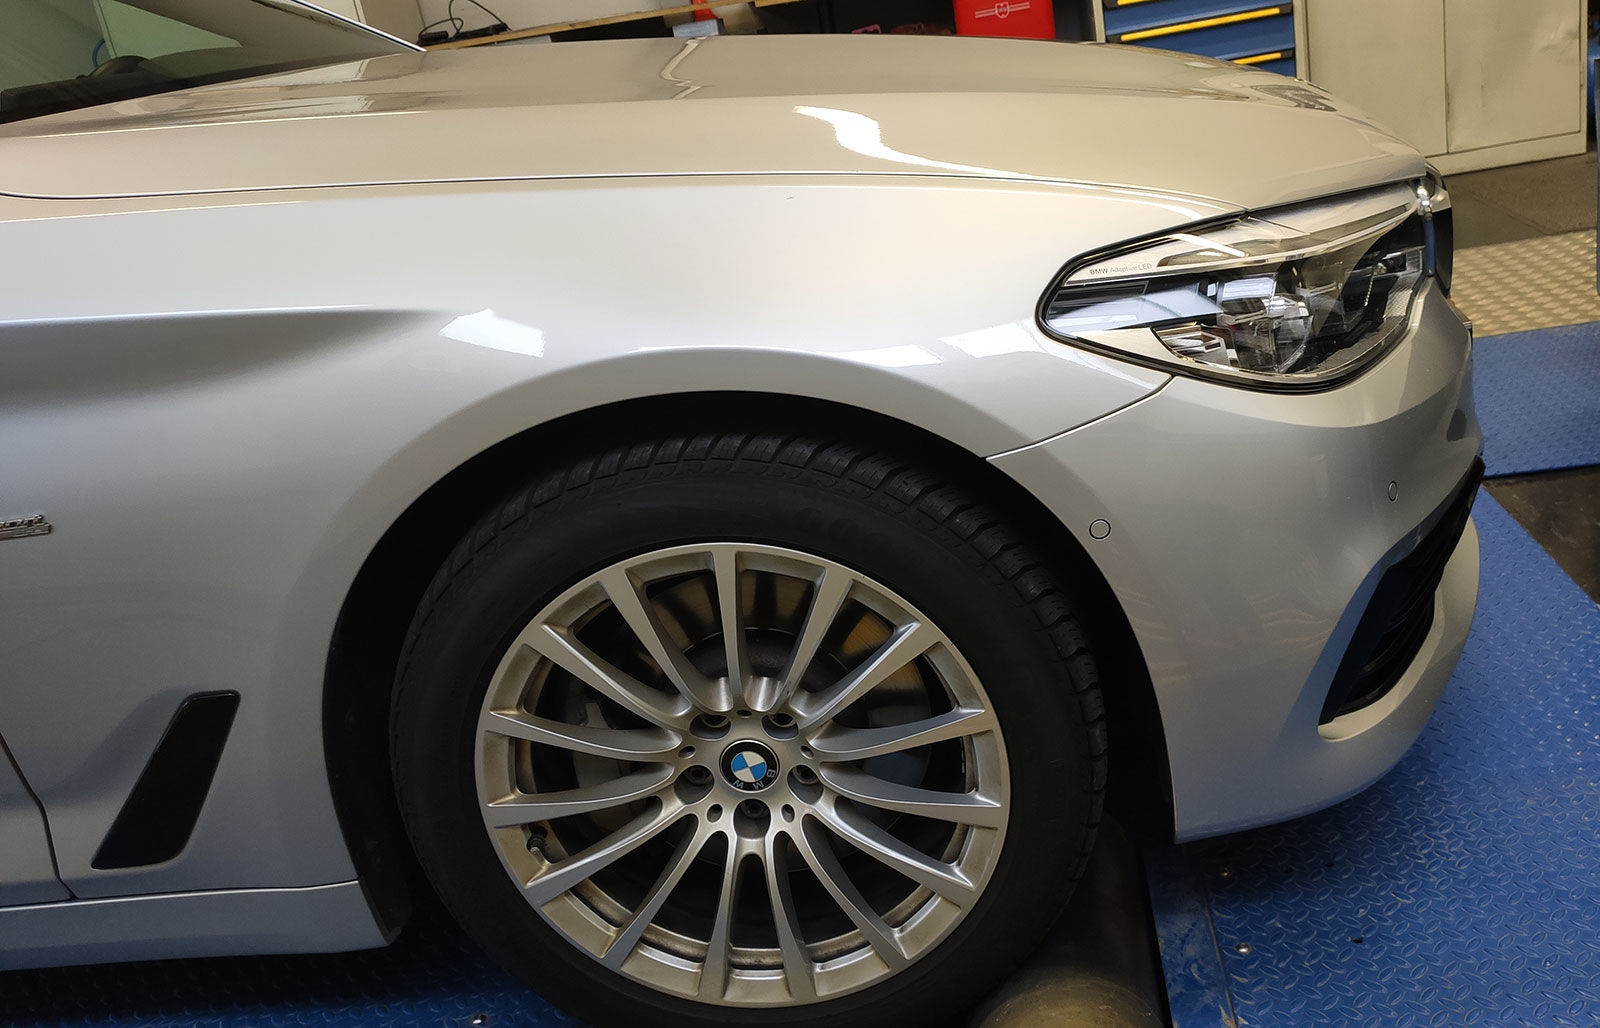 BMW 5 Series on the dyno